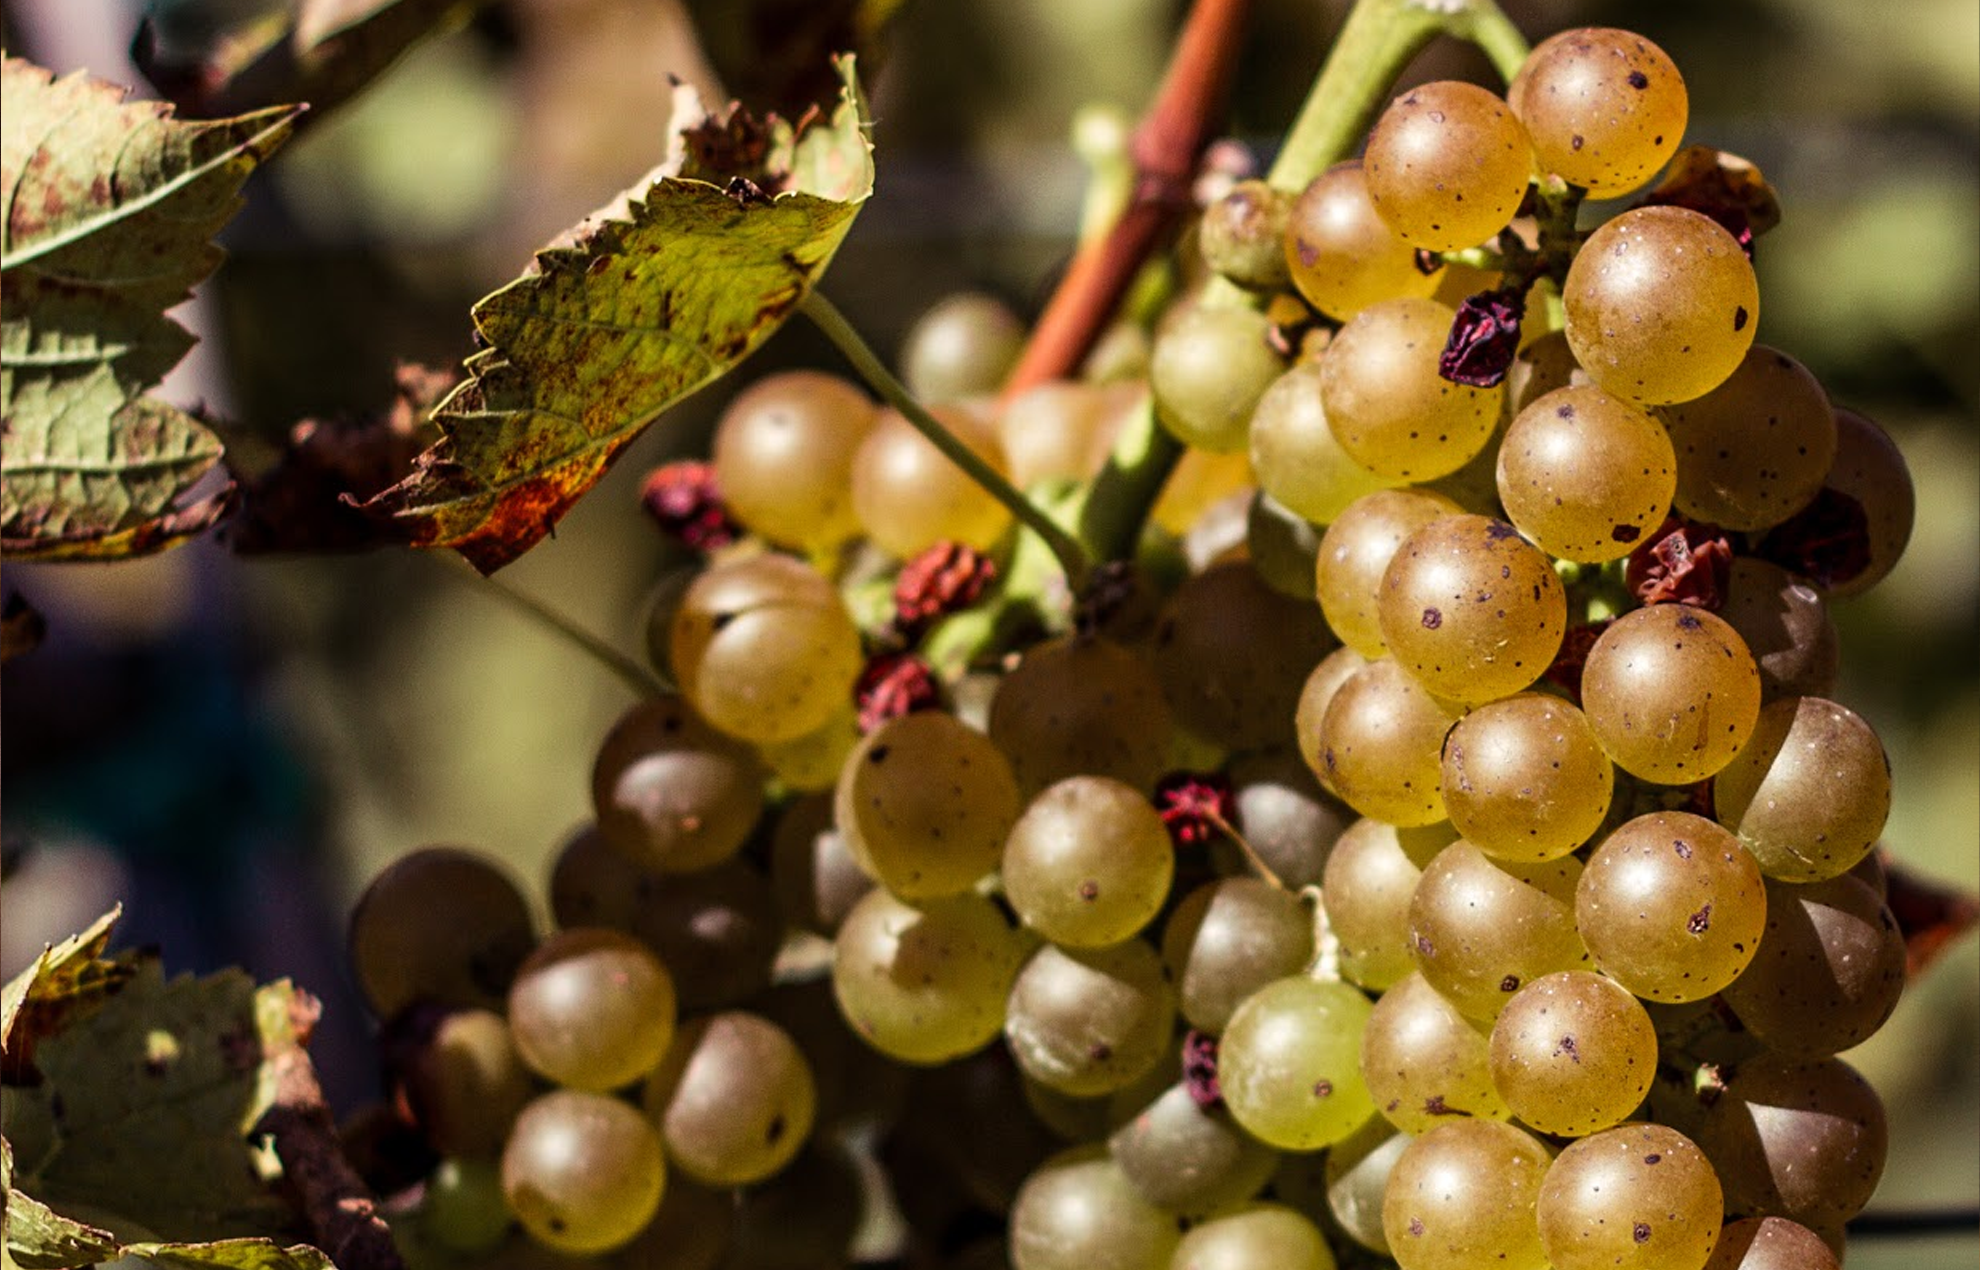 Close-up shot of grapes on a vine.
